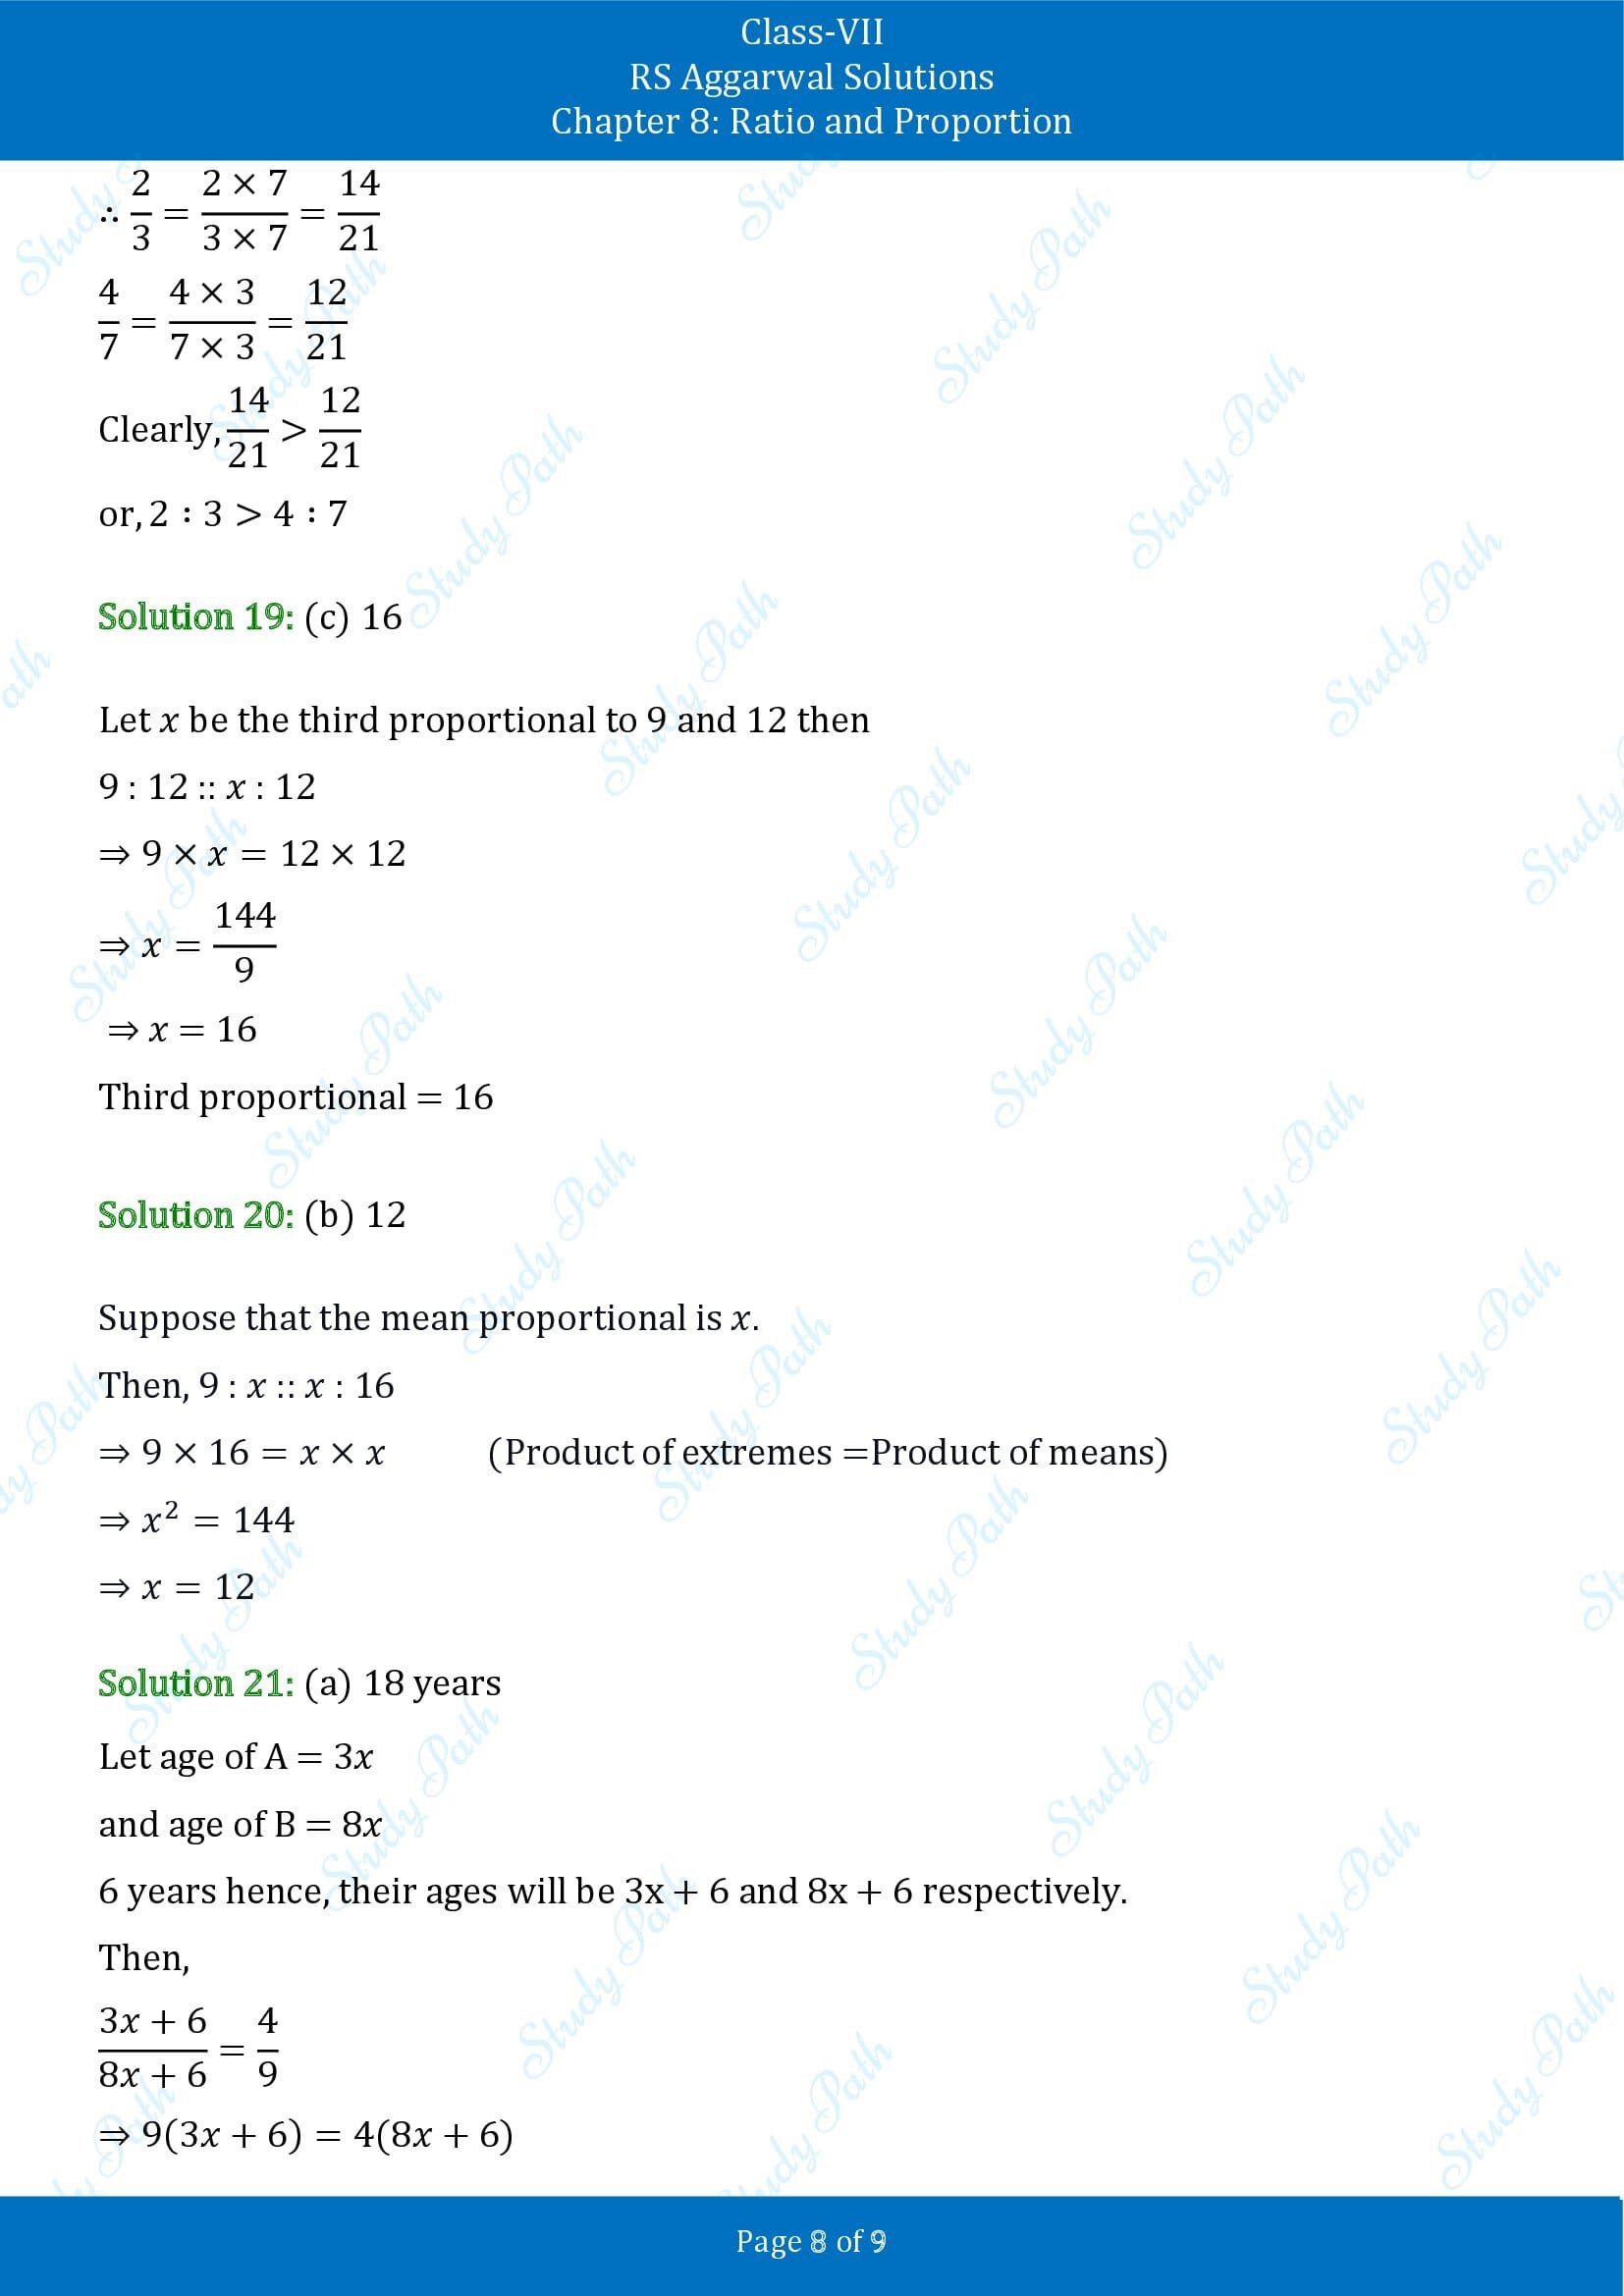 RS Aggarwal Solutions Class 7 Chapter 8 Ratio and Proportion Exercise 8CMCQ 00008